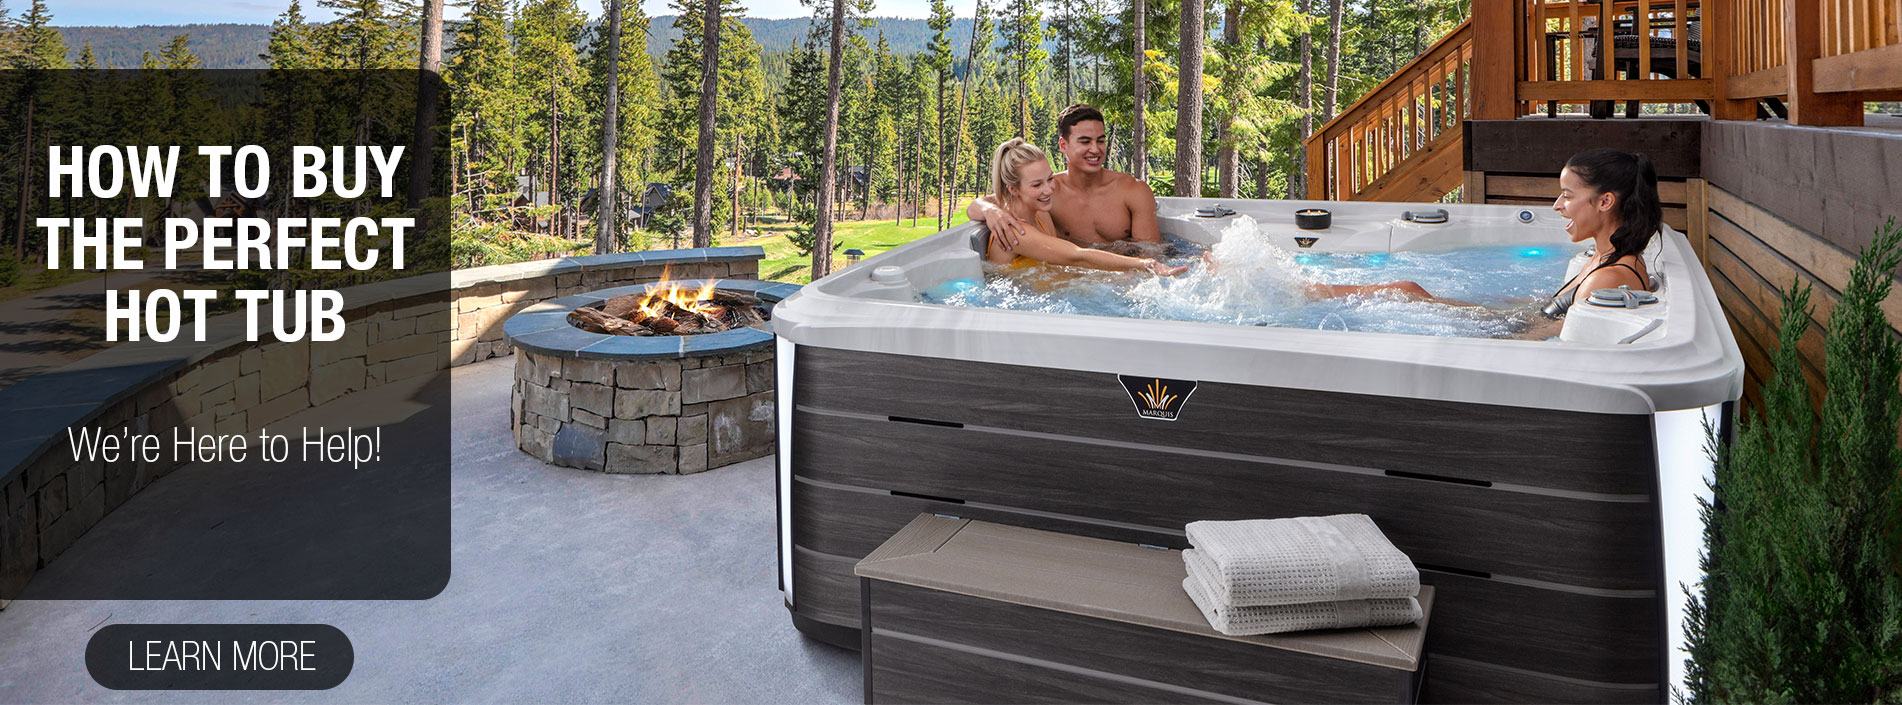 How to buy a hot tub